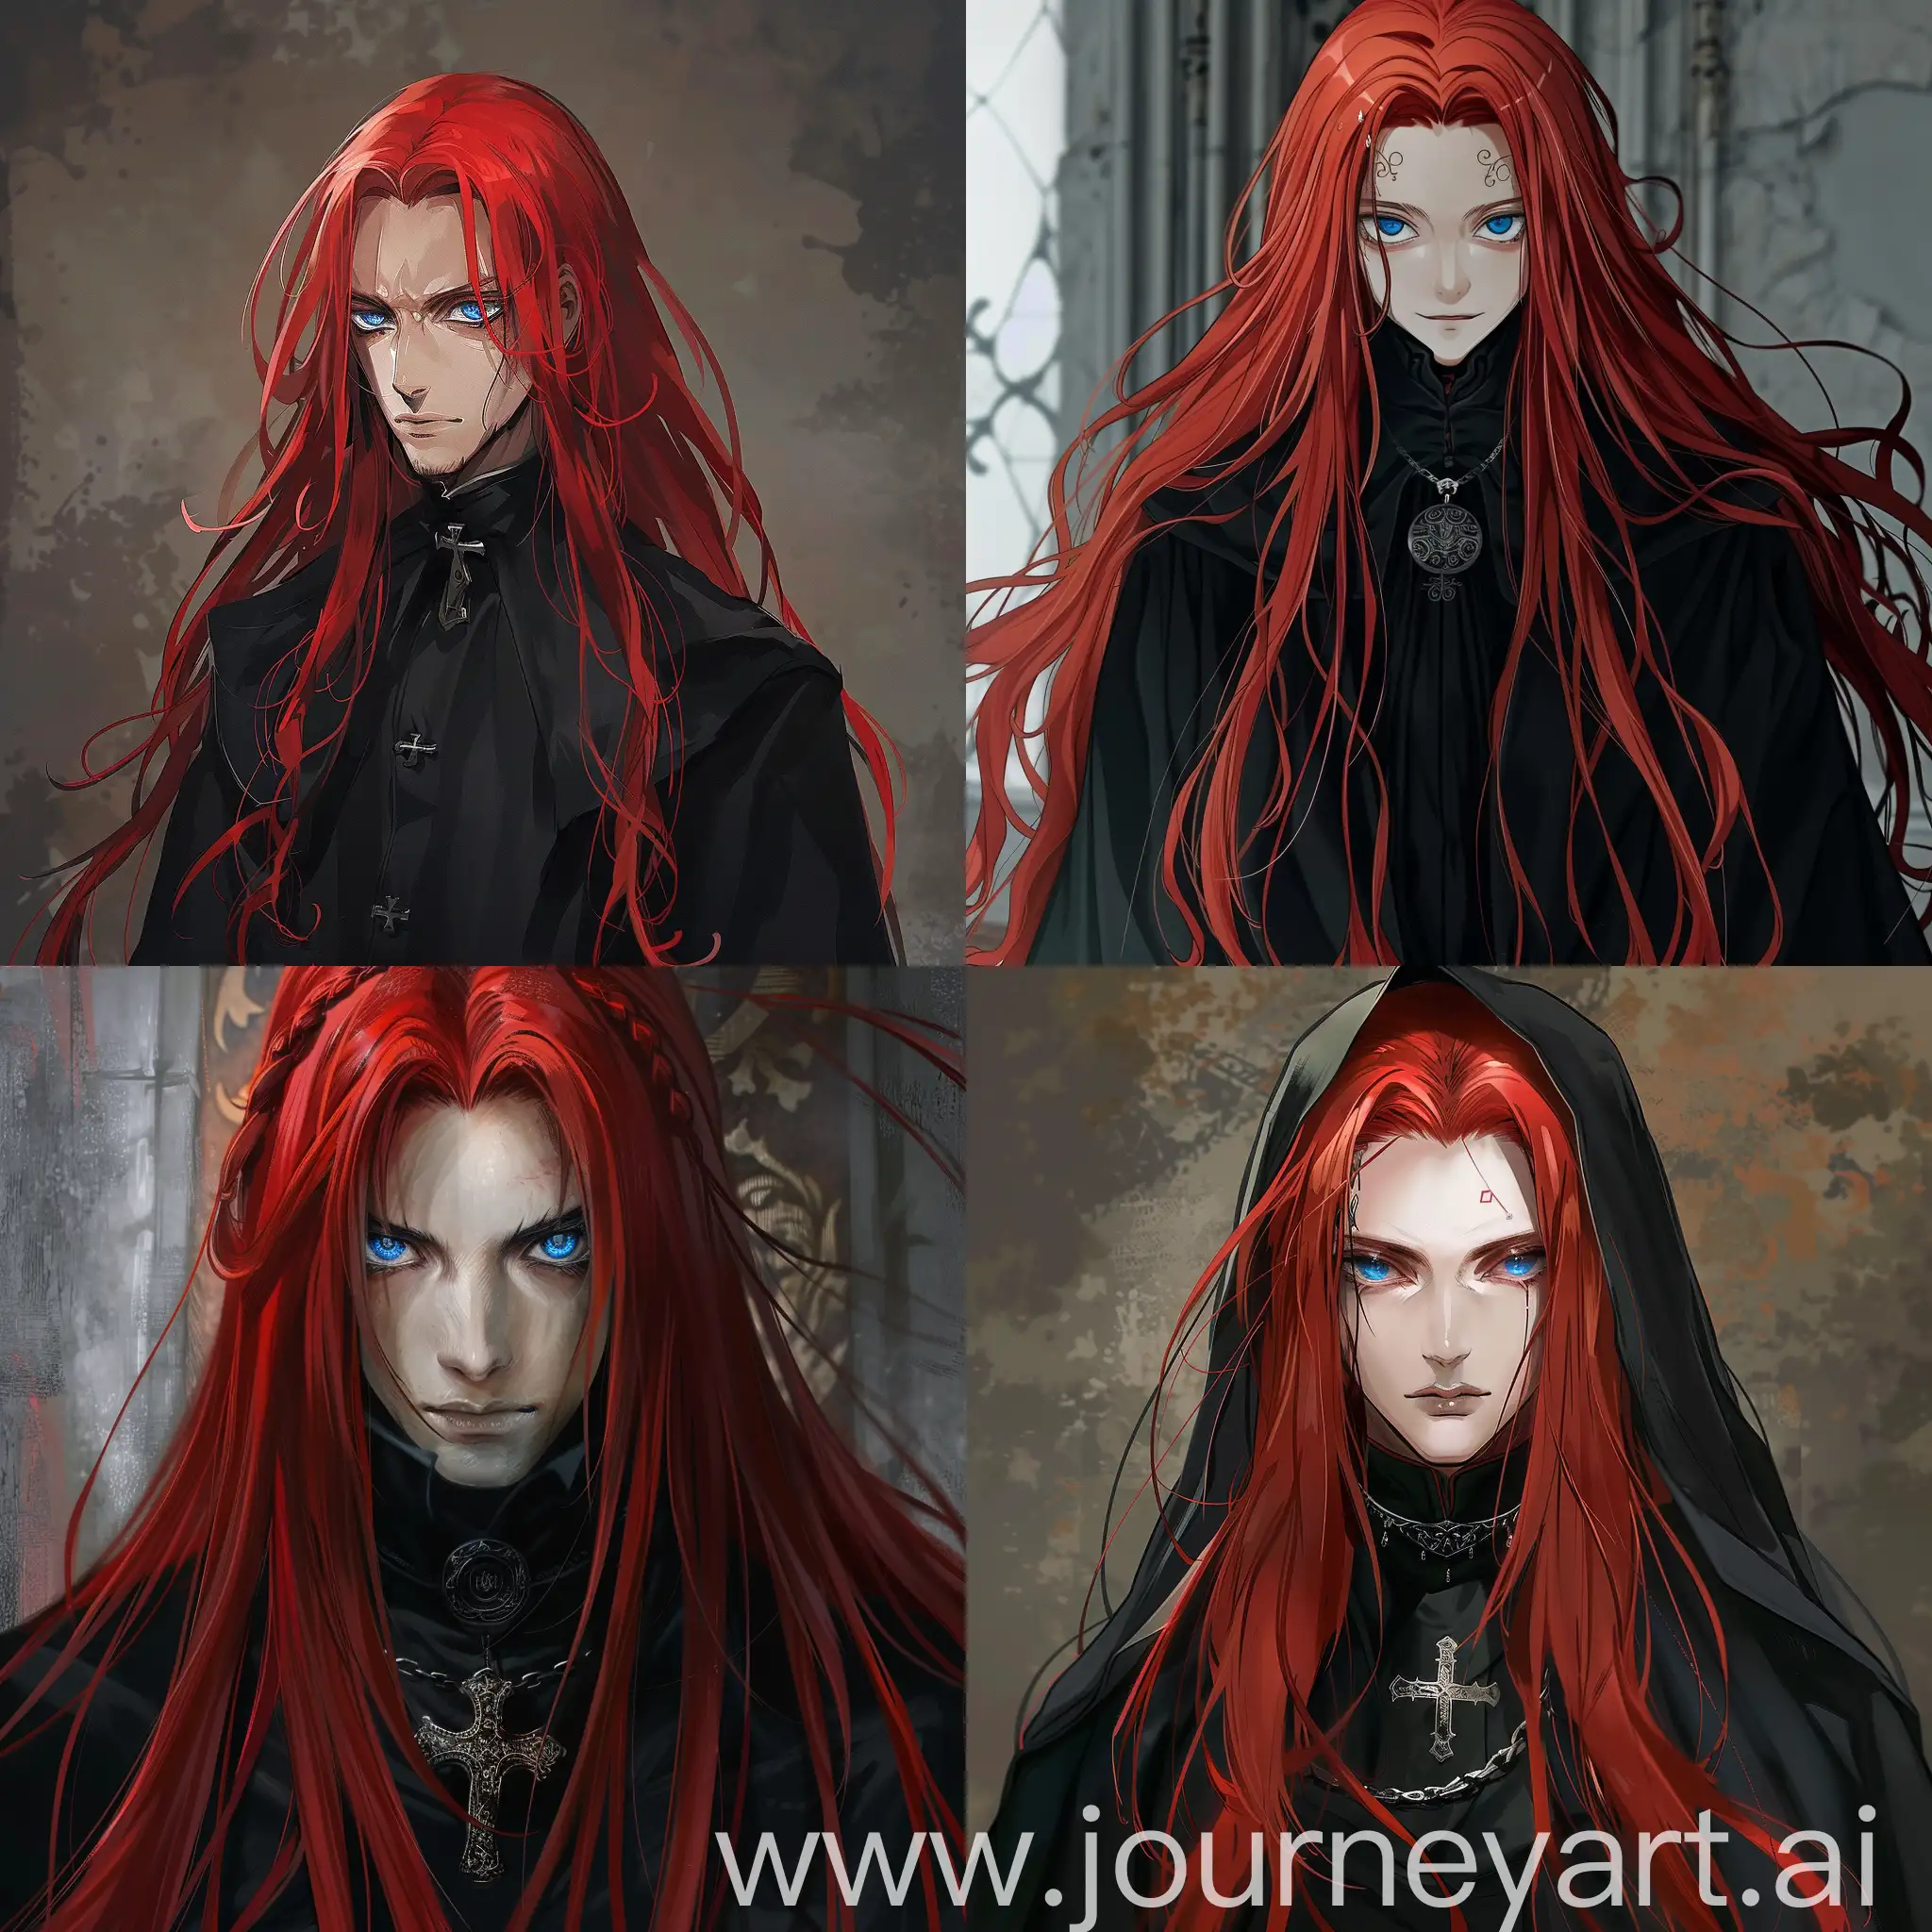 An ArkhangeL with long red hair and blue eyes wearing black priest clothes